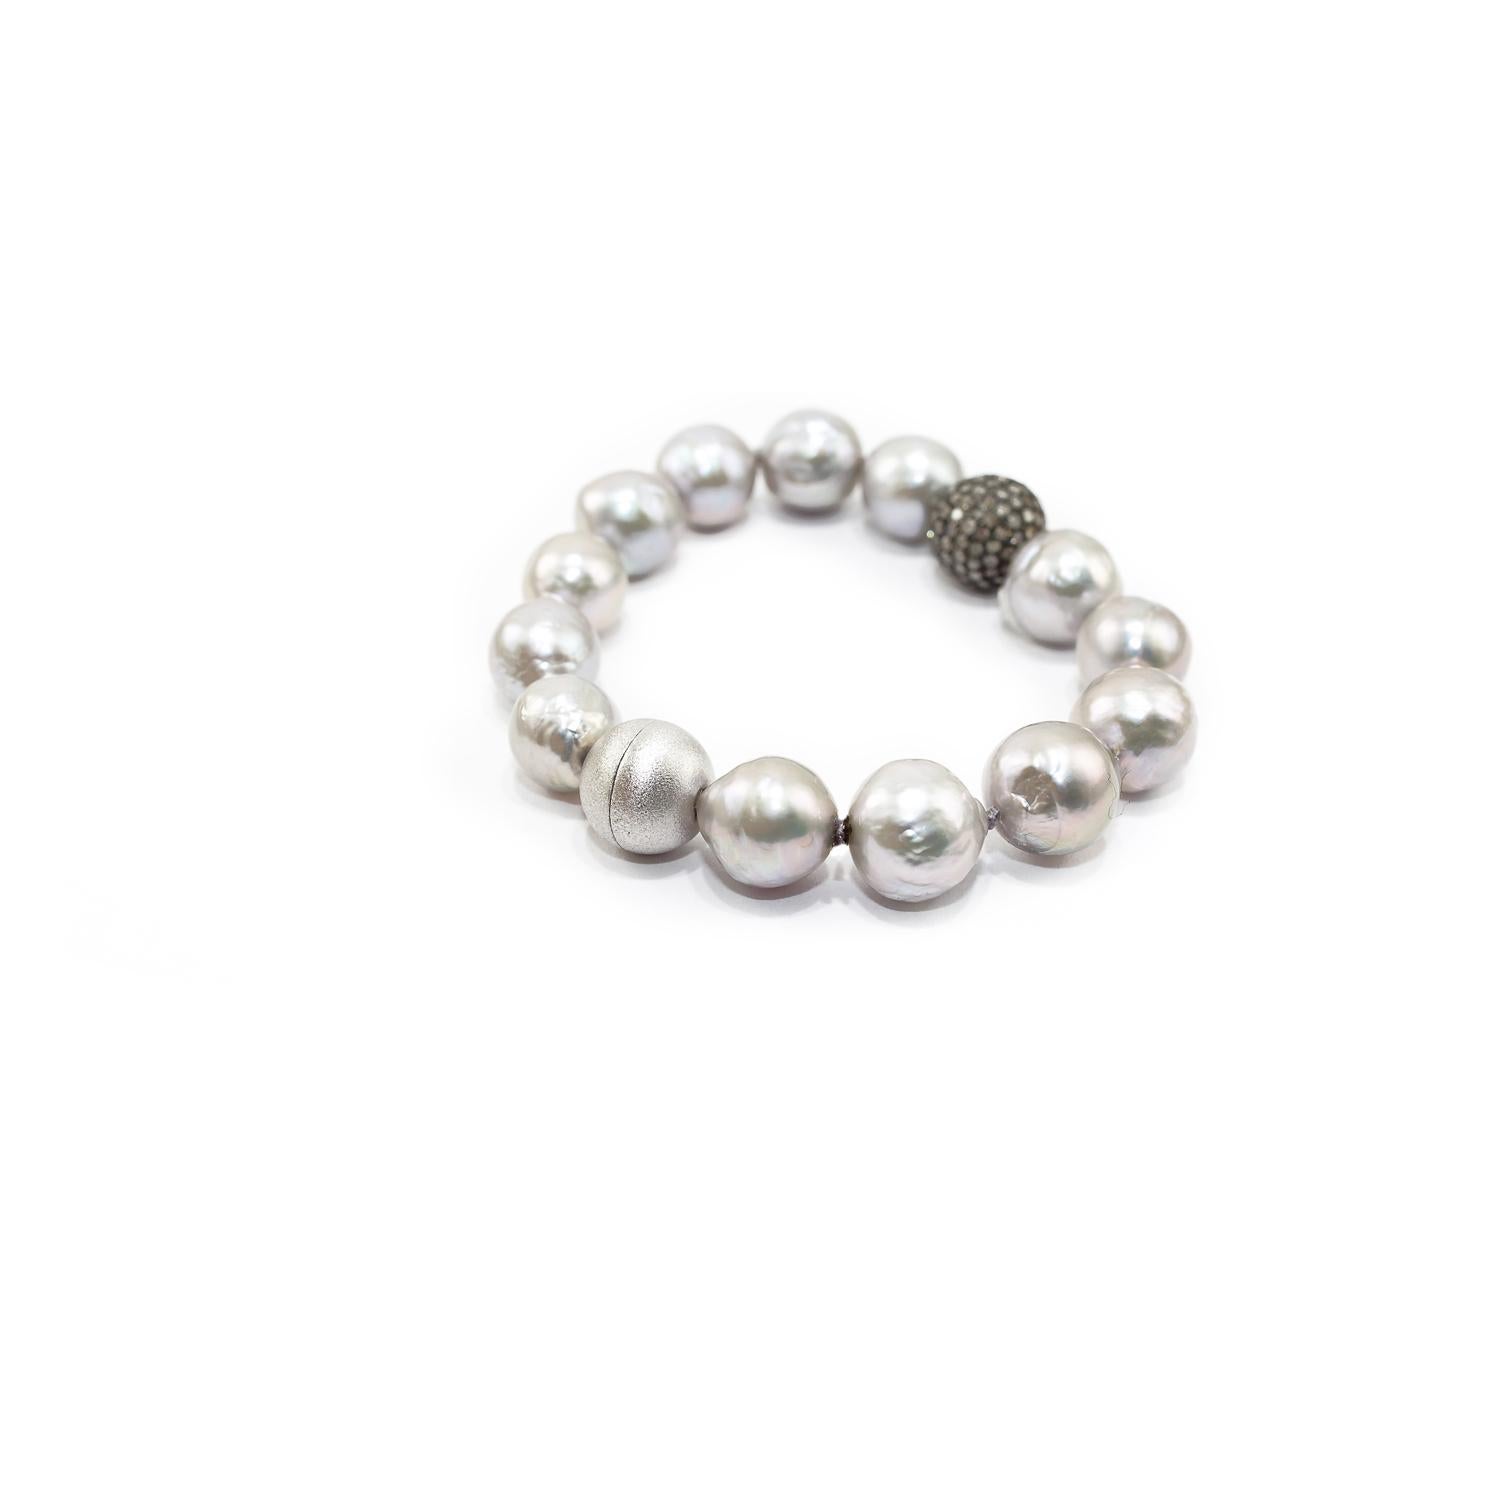 Uncut Ice Diamonds Pave, Pearls and Silver Clasp For Sale